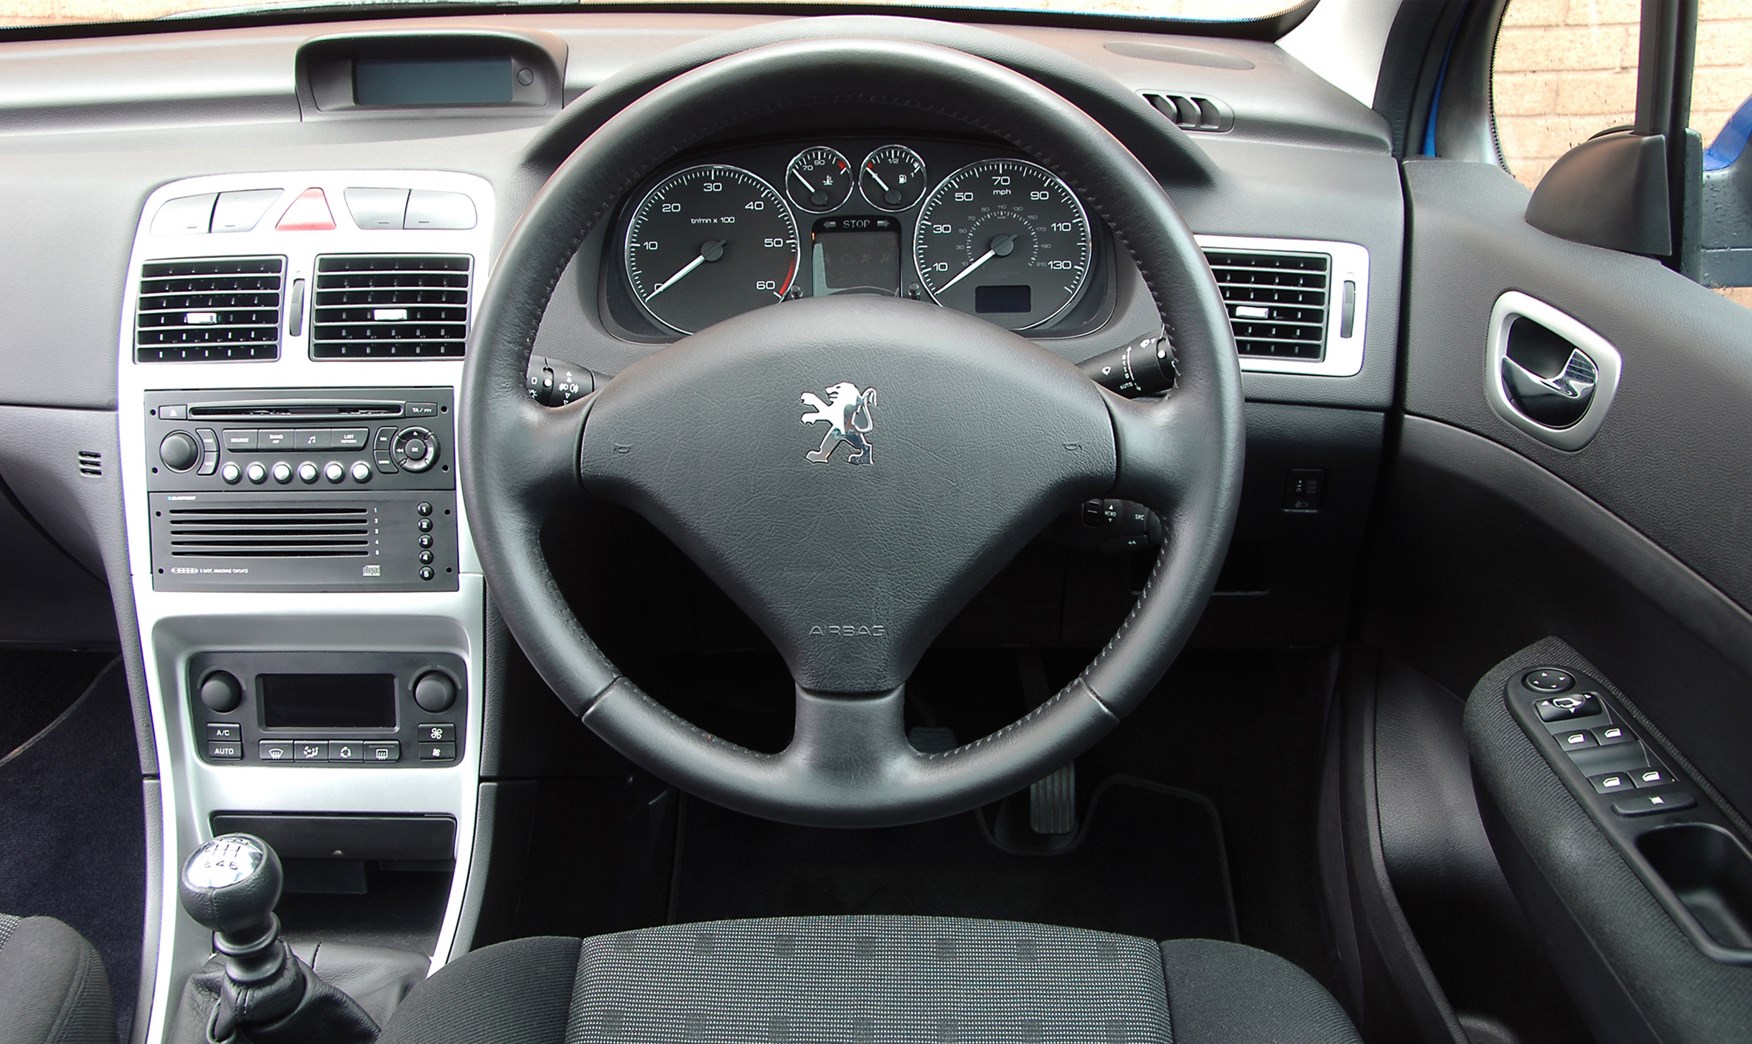 Sunday Mechanically wasteland Used Peugeot 307 SW (2002 - 2007) interior, tech and comfort | Parkers